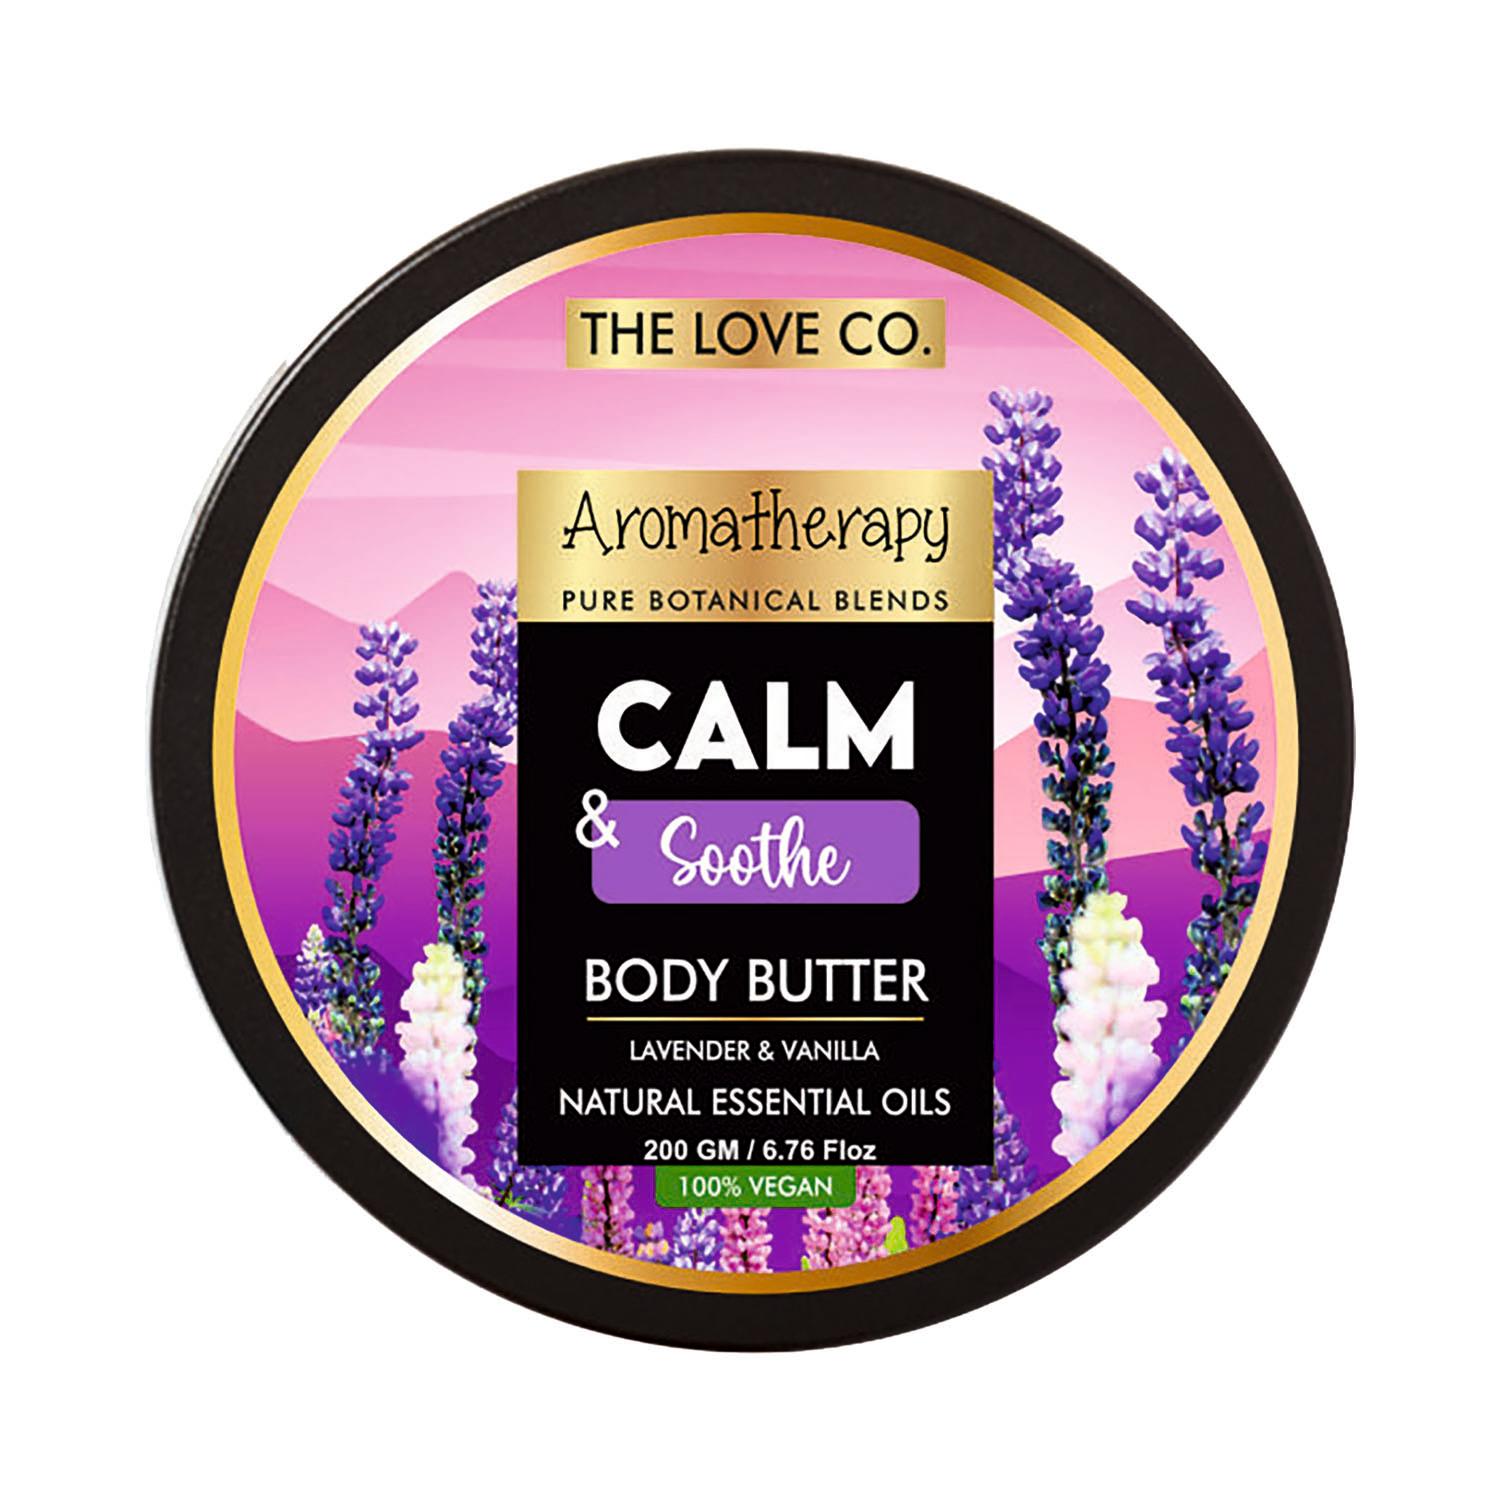 THE LOVE CO. | THE LOVE CO. Aromatherapy Calm and Soothe Body Butter With Lavender and Vanilla (200g)